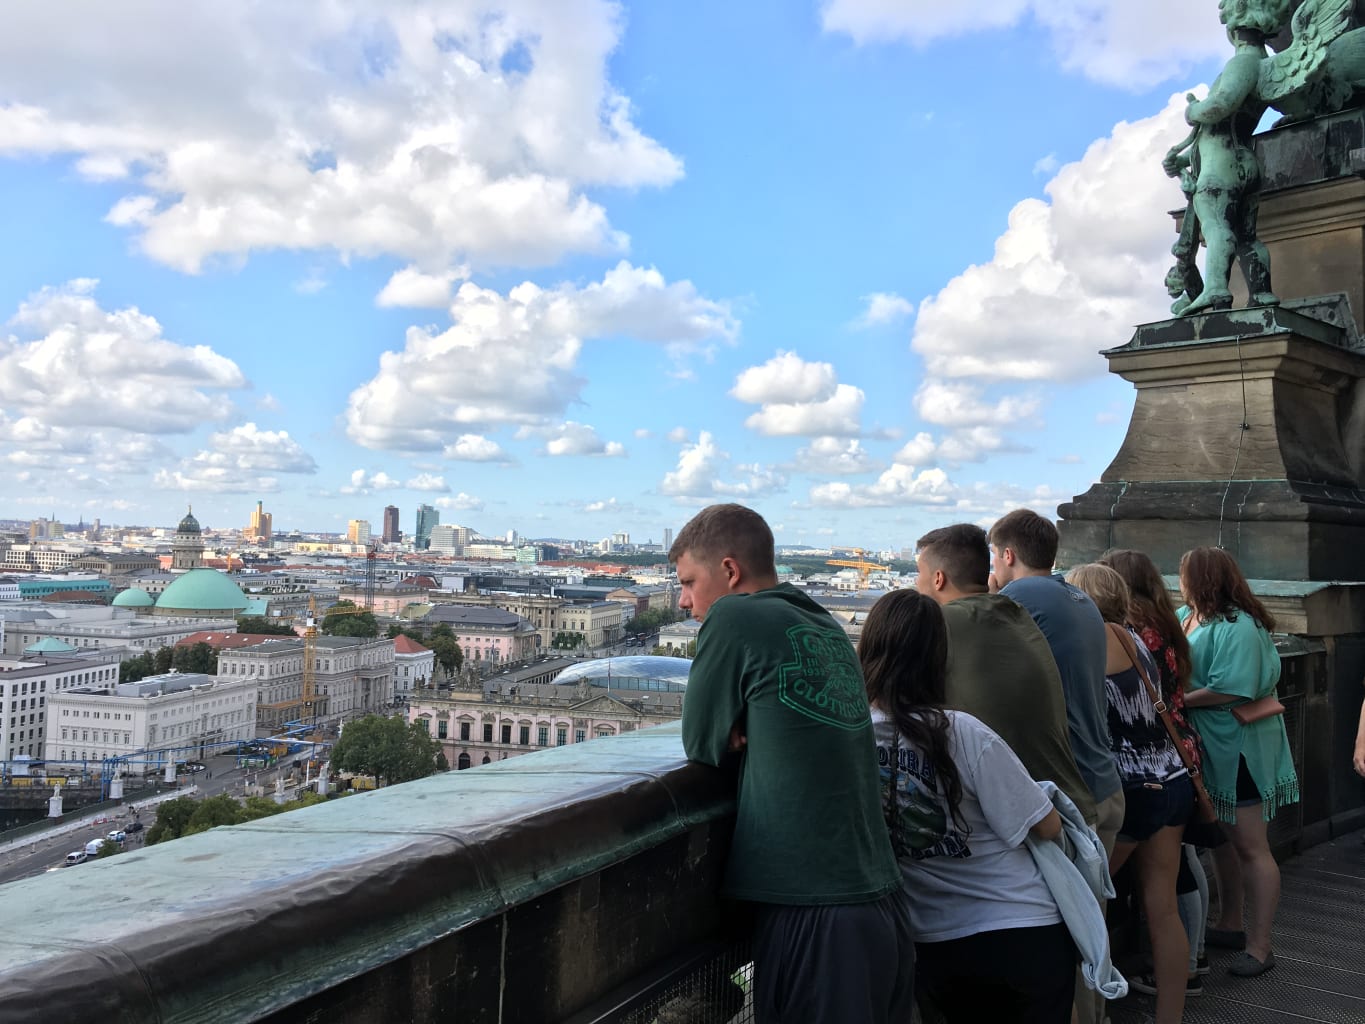 A group of students looking at an aerial view of a city.